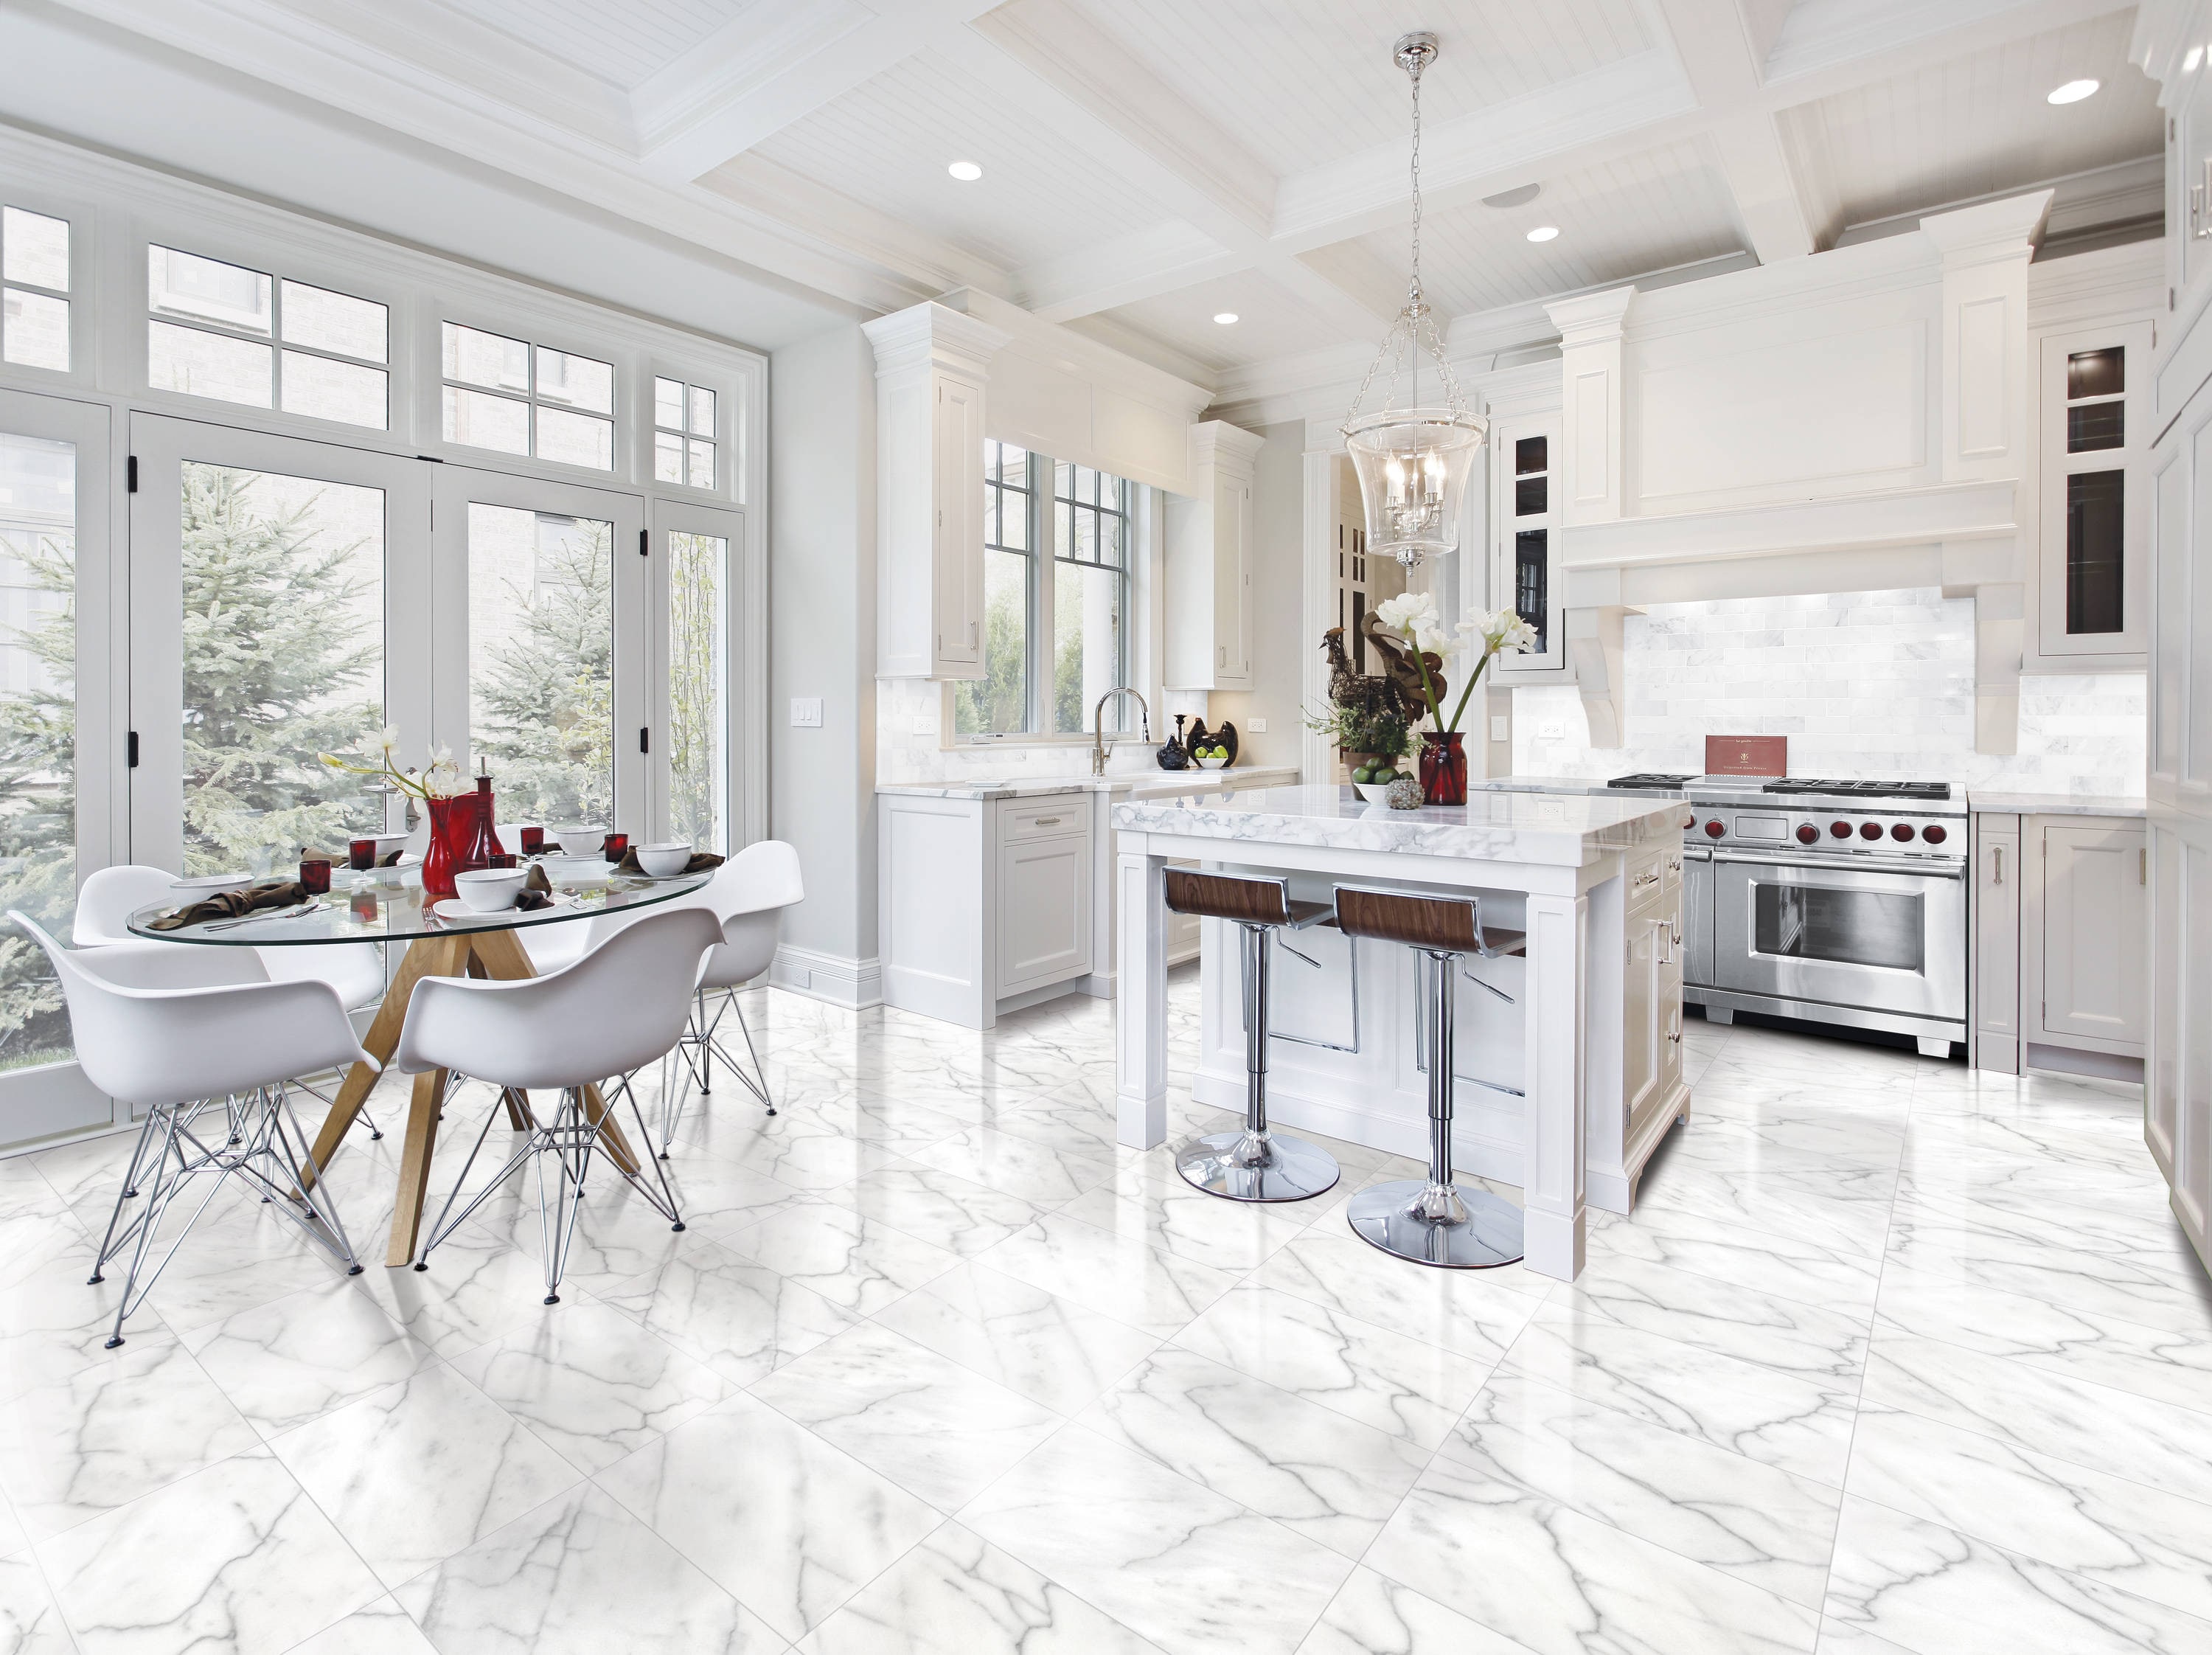 light colored kitchen flooring marble